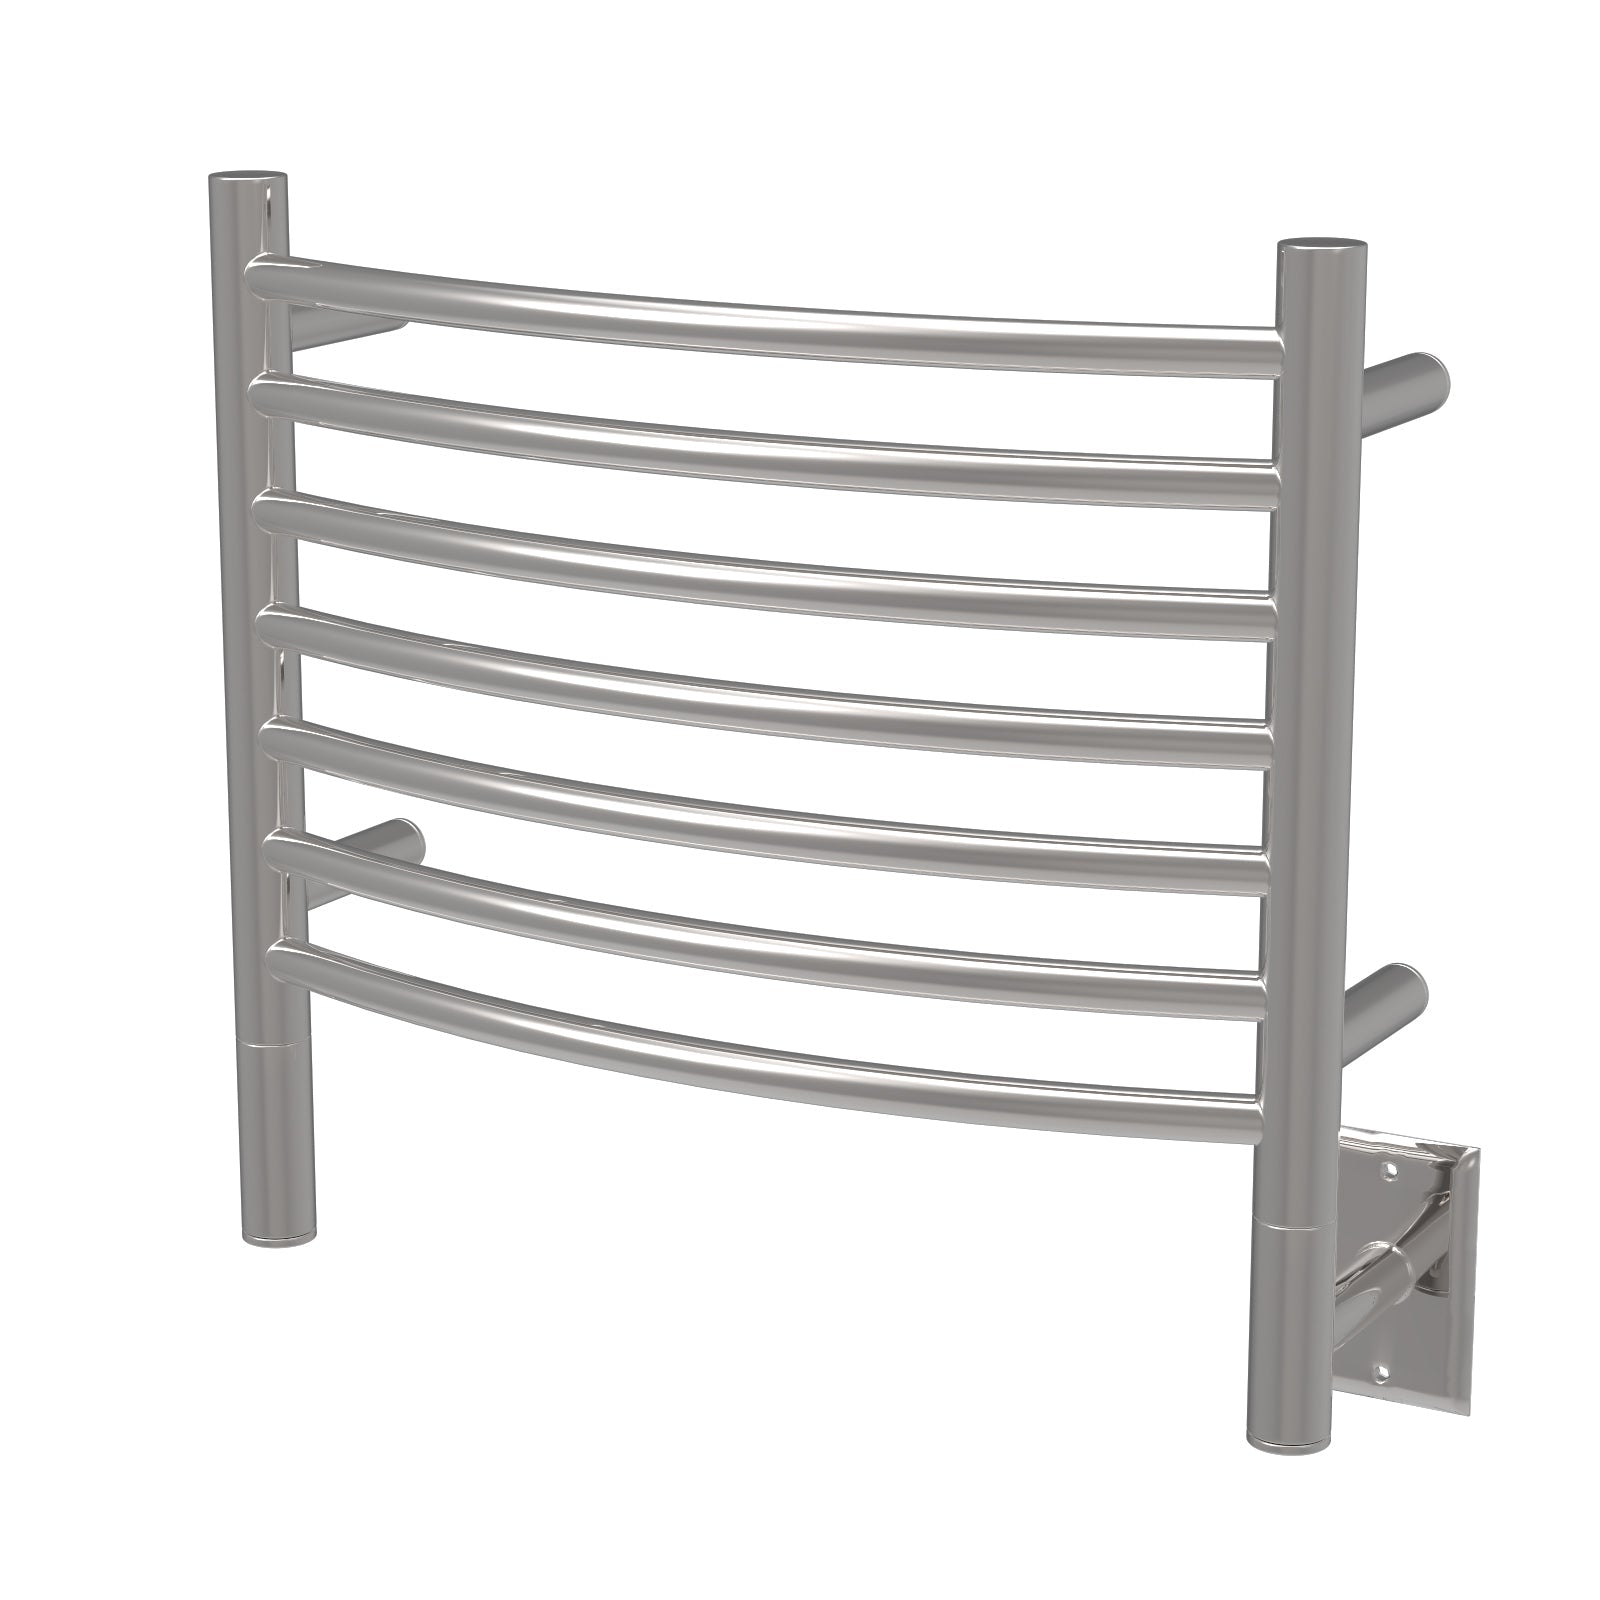 Brushed Towel Warmer, Amba Jeeves H Curved, Hardwired, 7 Bars, W 21" H 18"